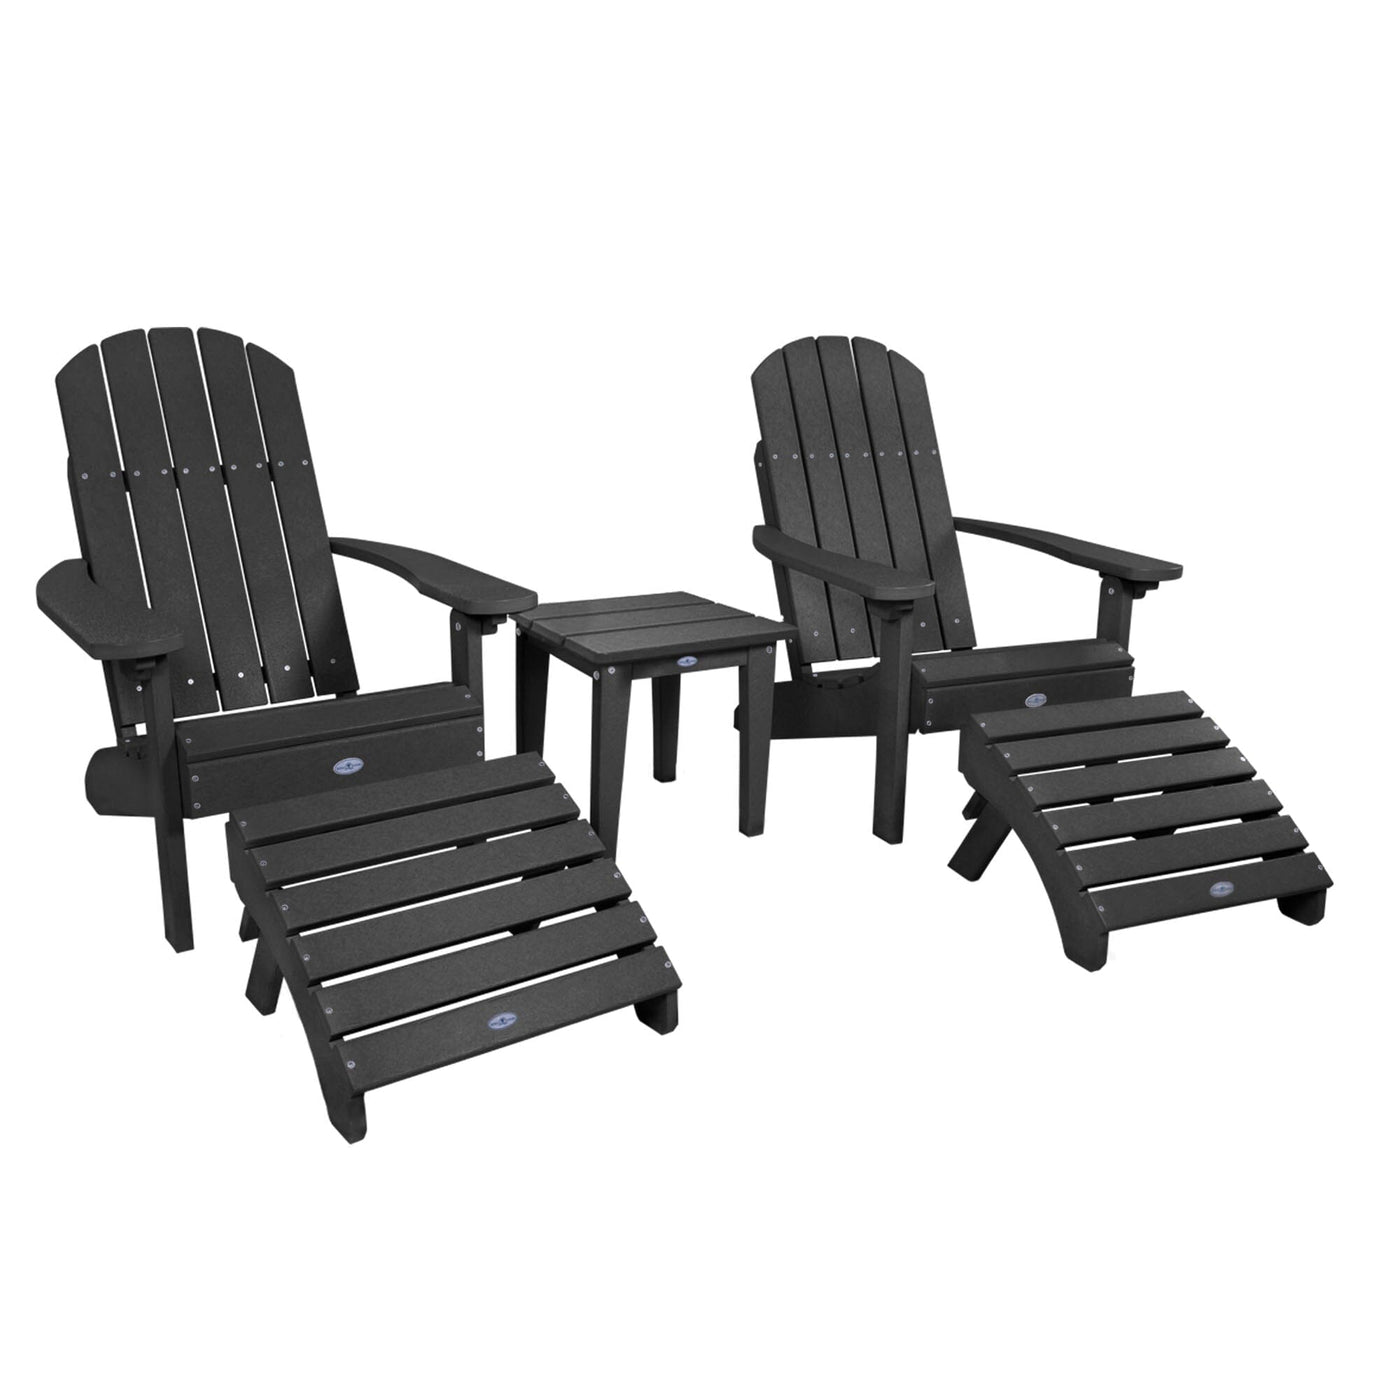 Two Cape Classic Adirondack Chairs, Side Table and Ottoman 5 pc Set Kitted Set Bahia Verde Outdoors Black Sand 